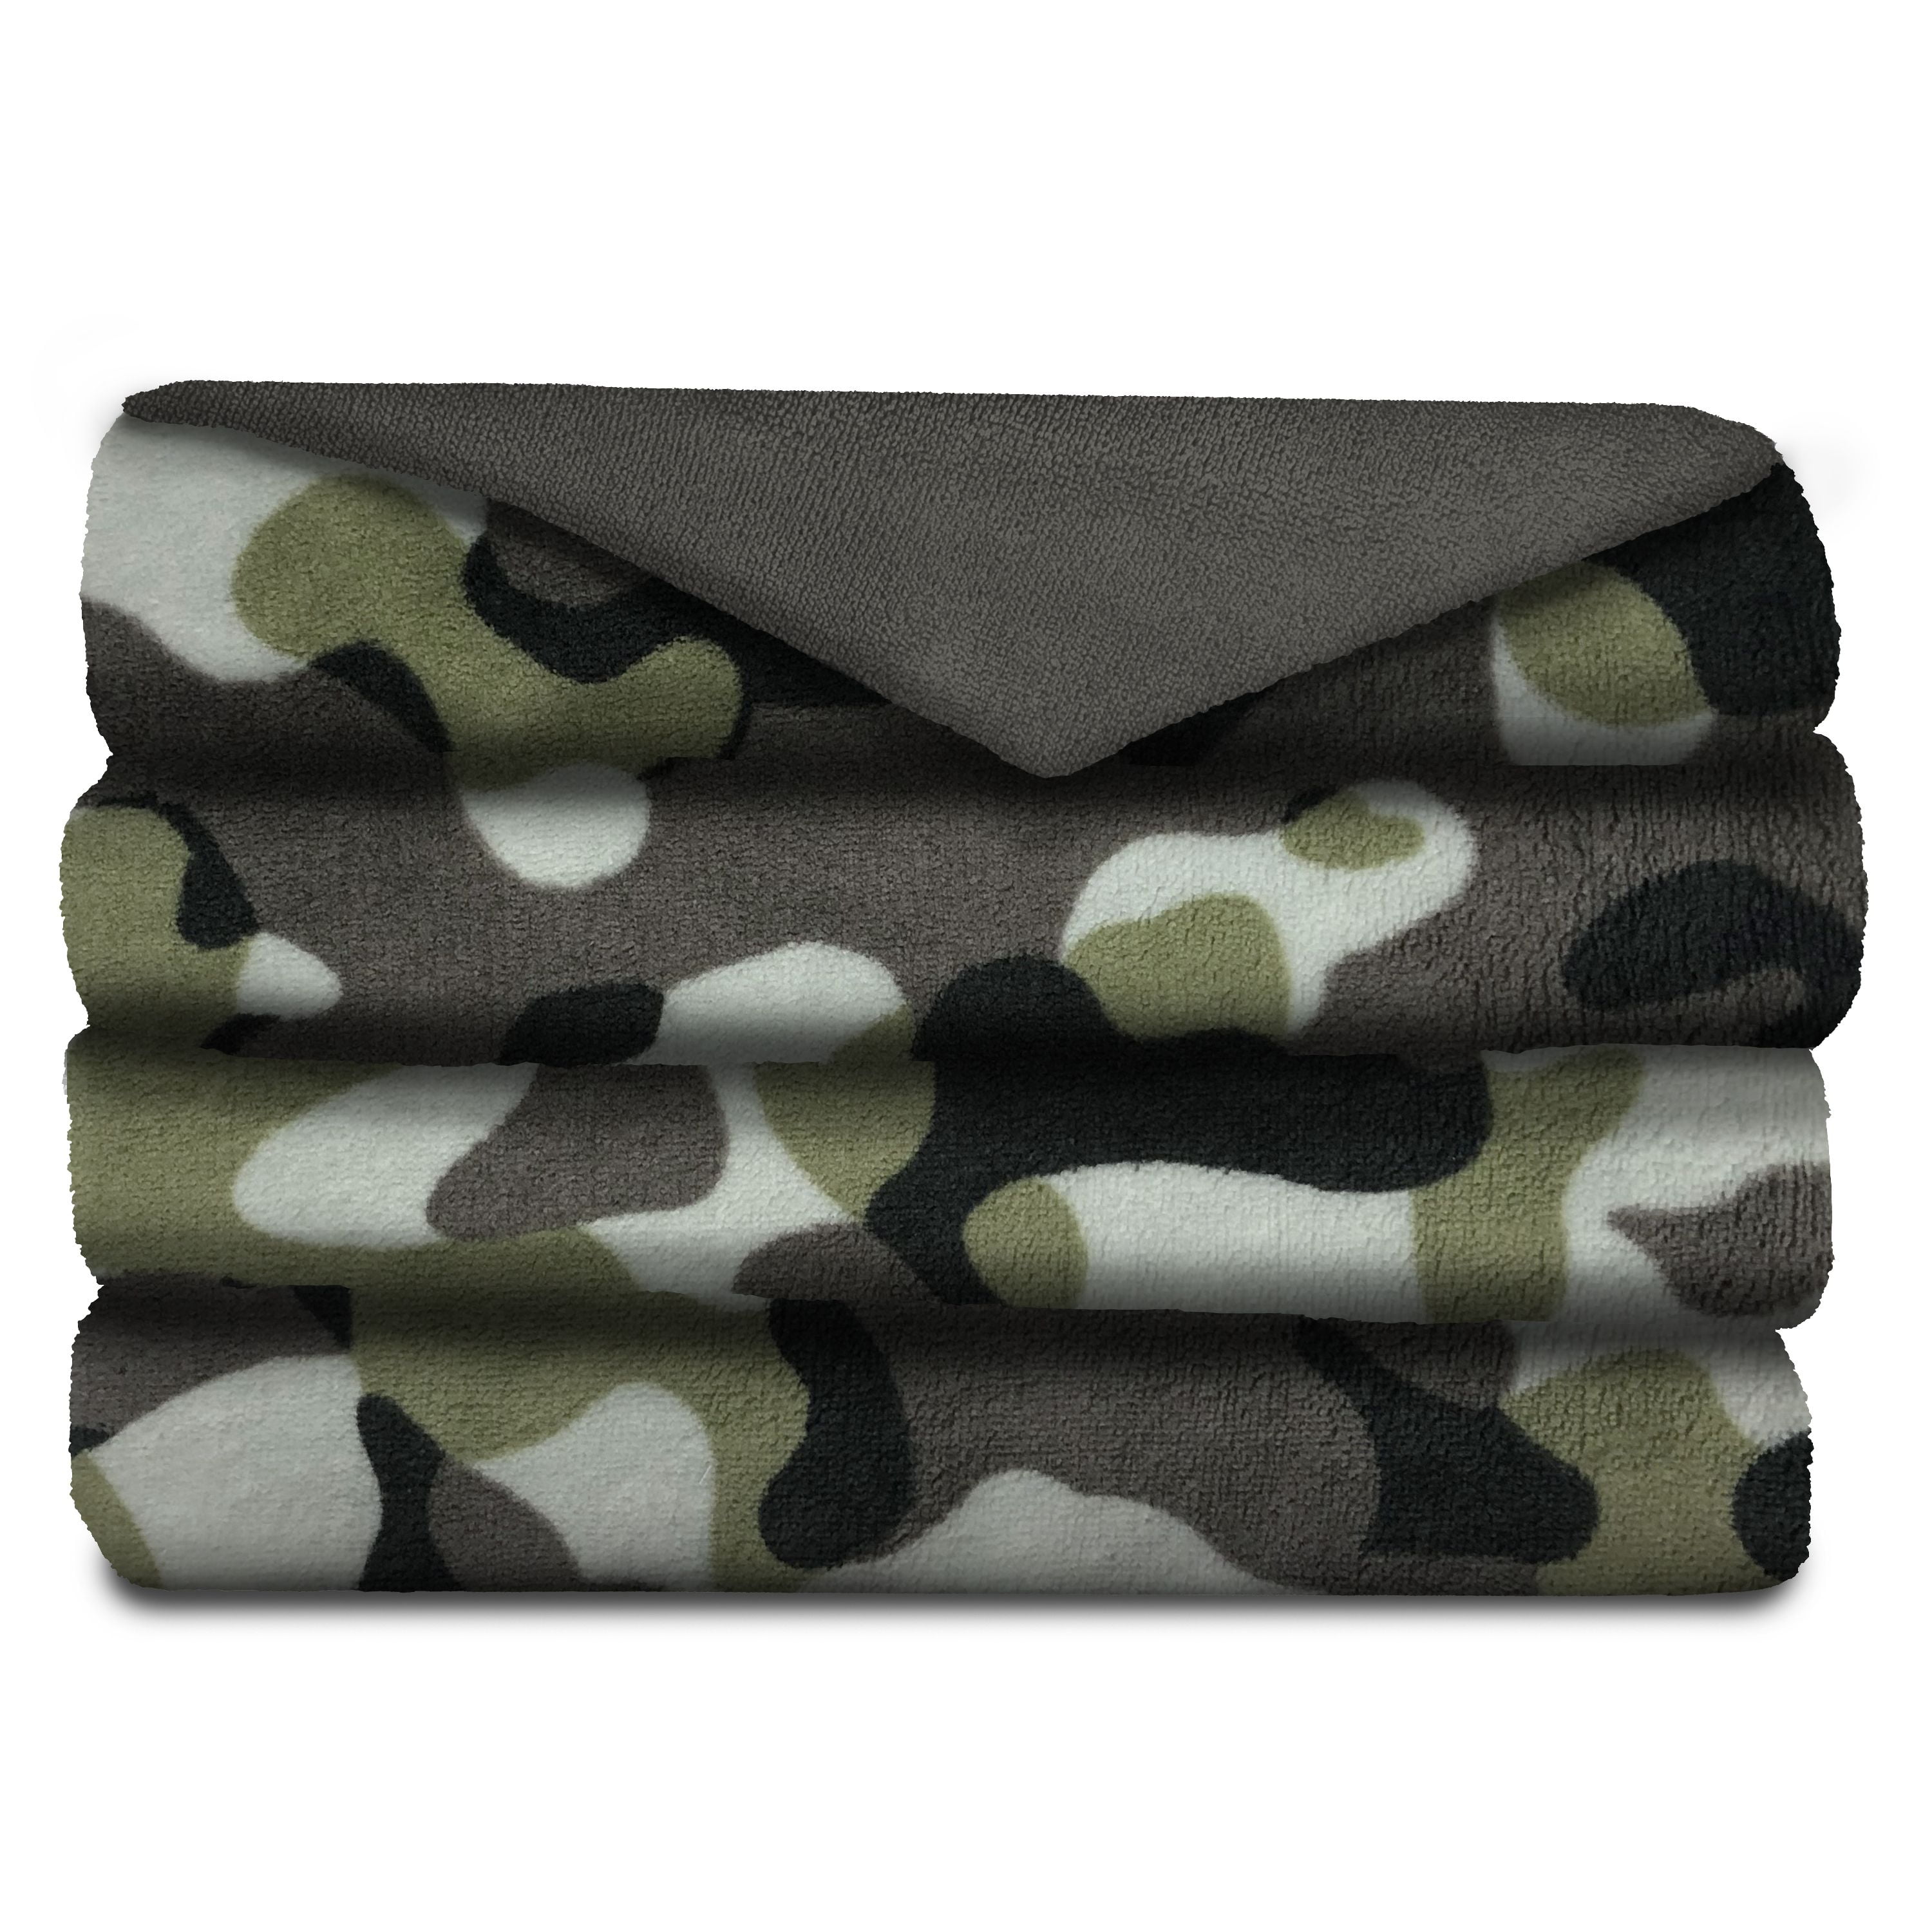 Details about   CAMO CAMOUFLAGE SOFT FLEECE THE WOODS CASHMERE THROW BLANKET TWIN 60 x 80 inch 